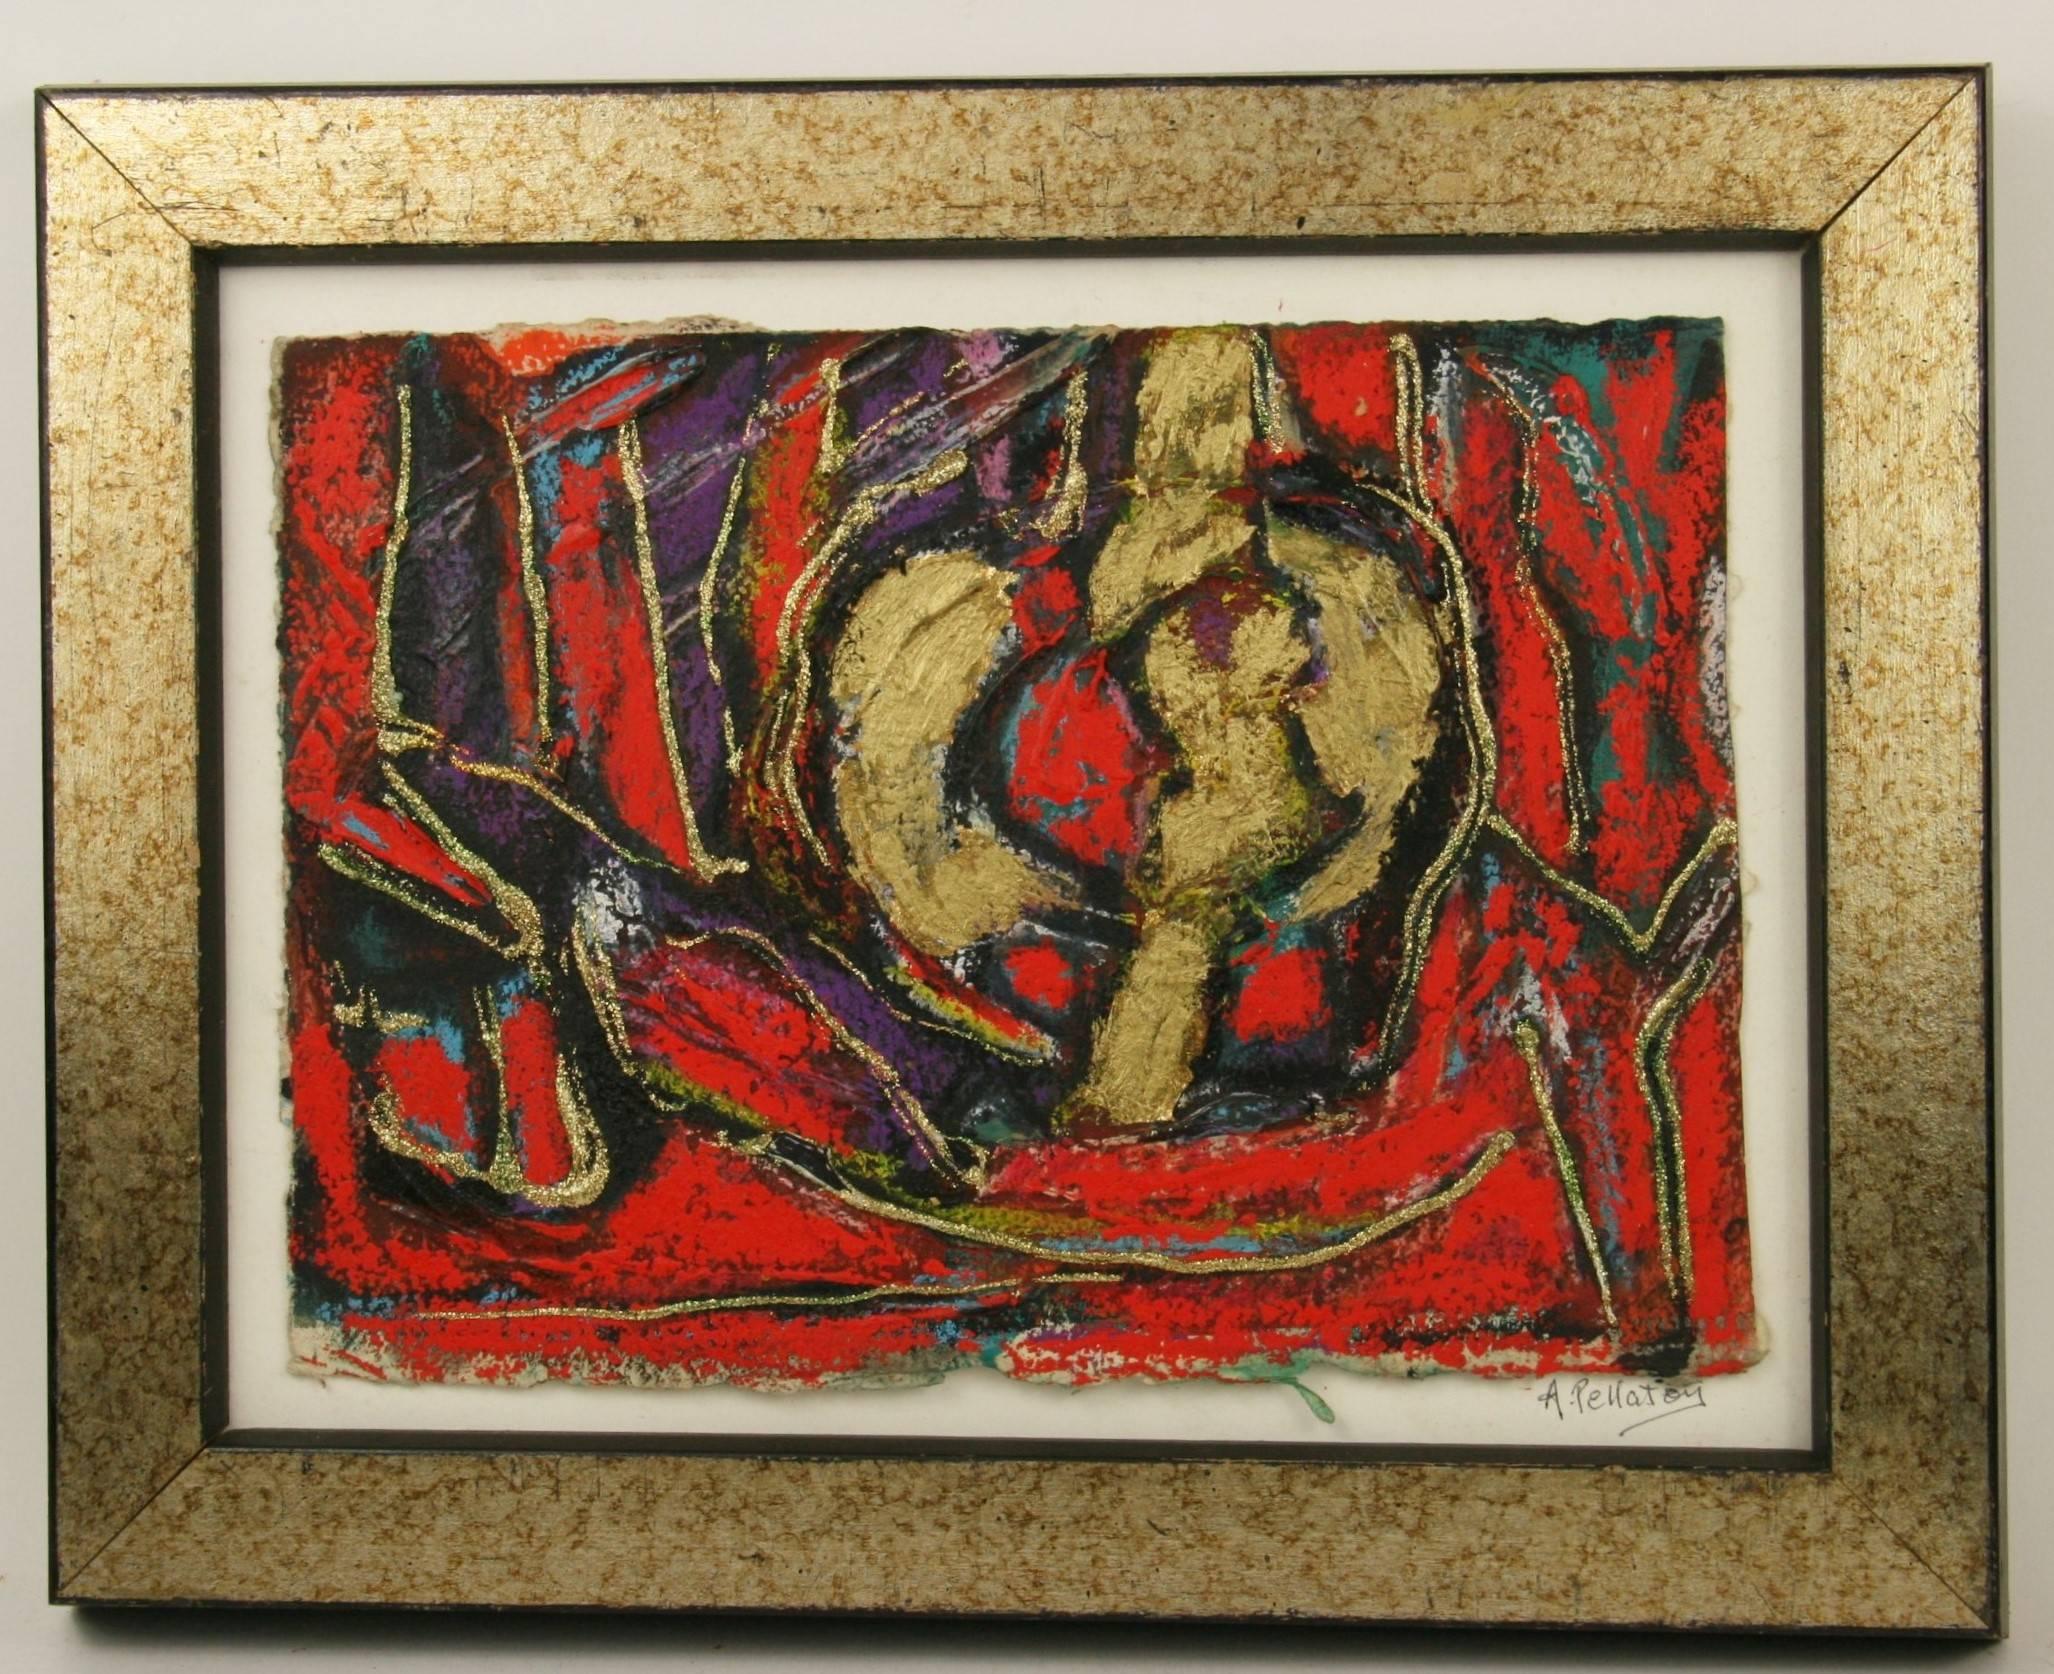 #5-2600 An abstract mixed media gold leaf -acrylic on hand made paper,displayed in a gilt wood frame,Signed lower right by A.Pellatoy